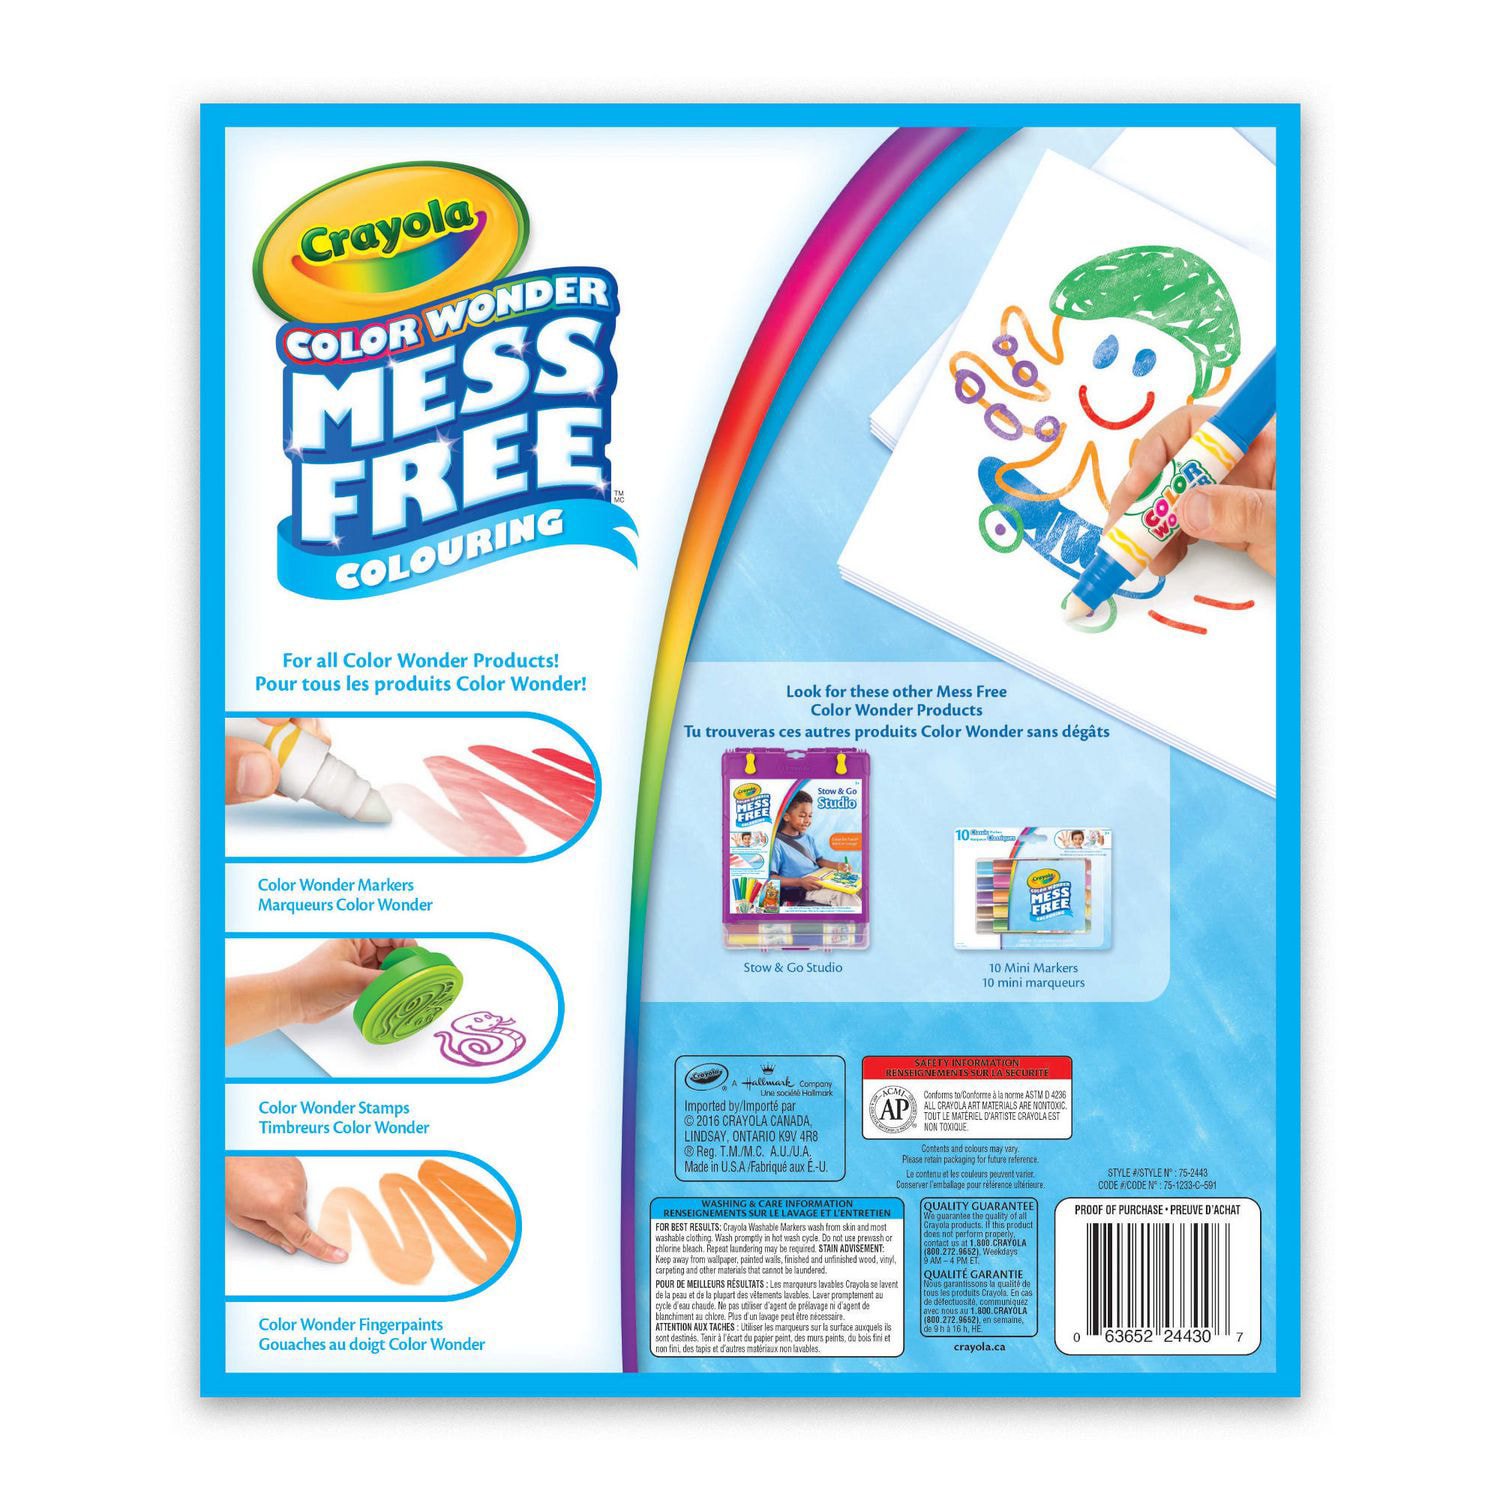 Crayola Color Wonder Mess-Free Travel Activity Pad, Blue's Clues